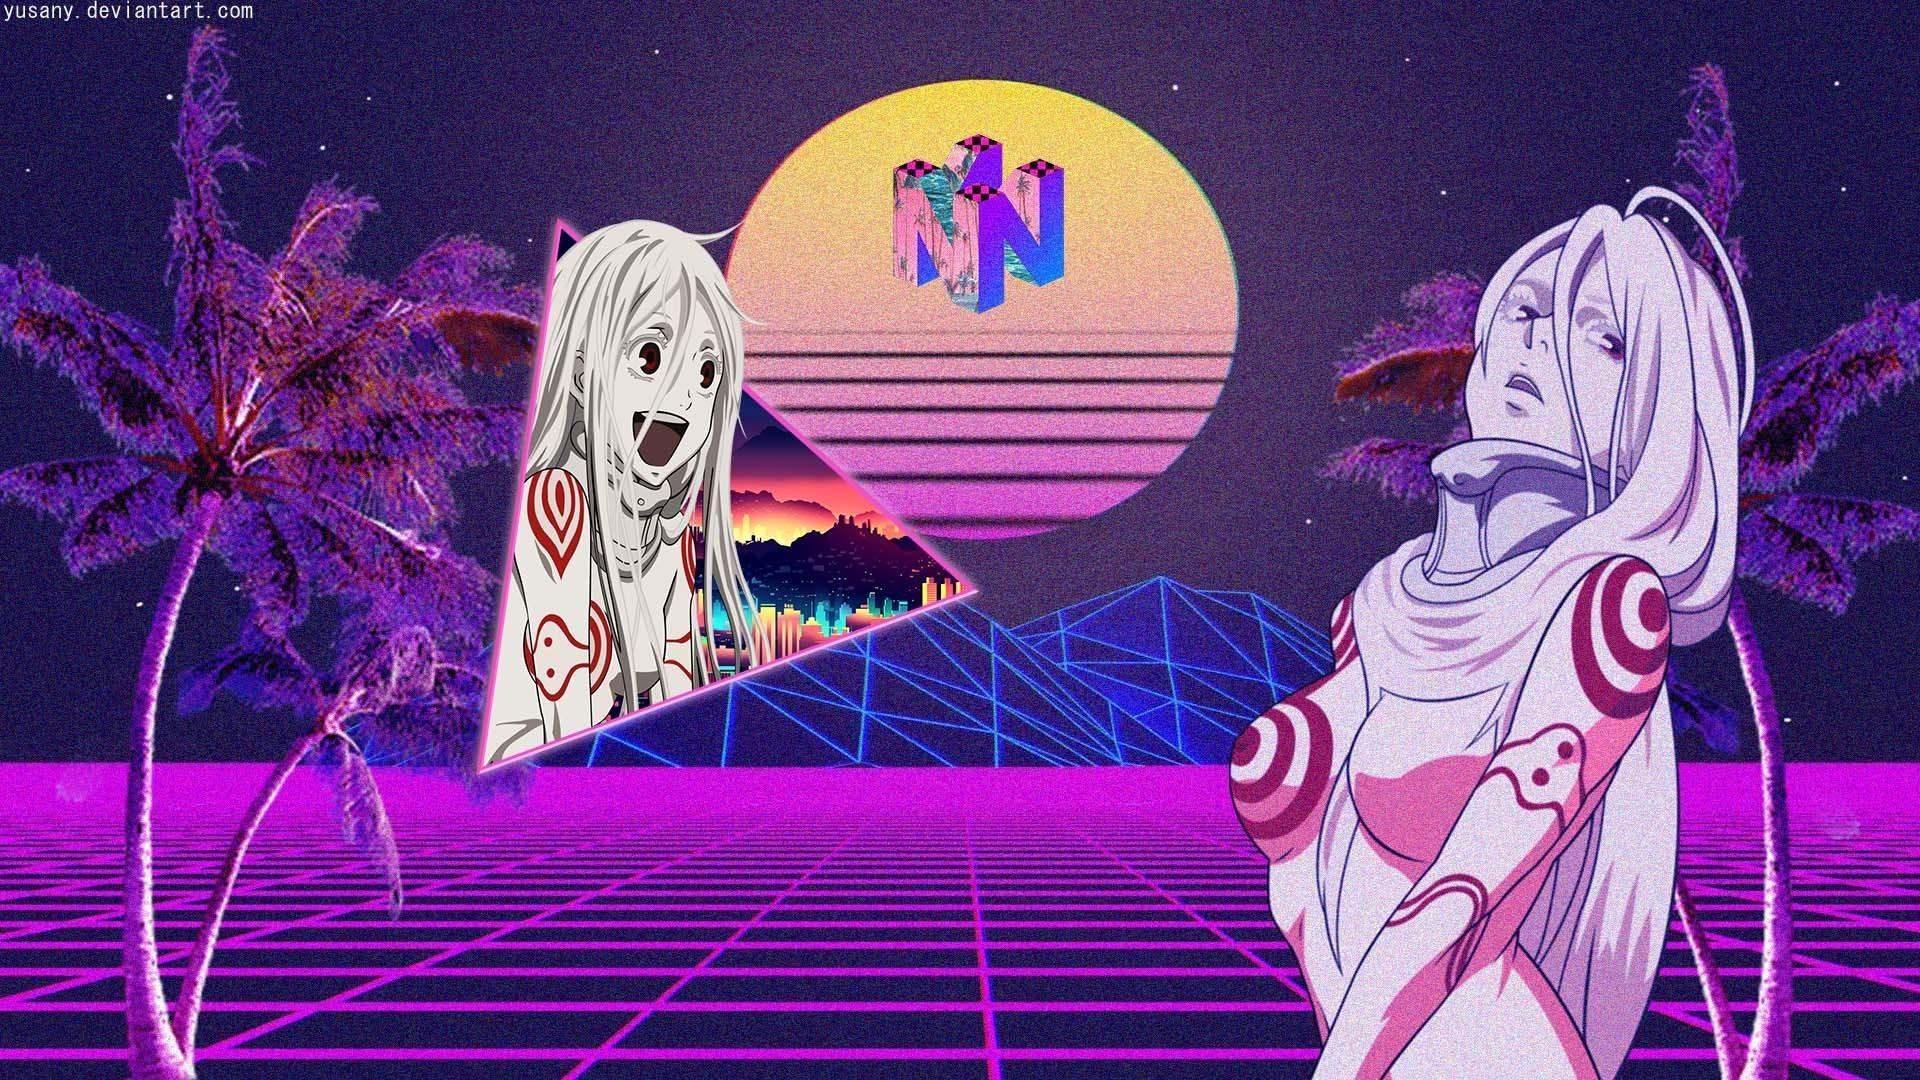 80s Synthwave Anime Wallpapers - Top Free 80s Synthwave Anime ...